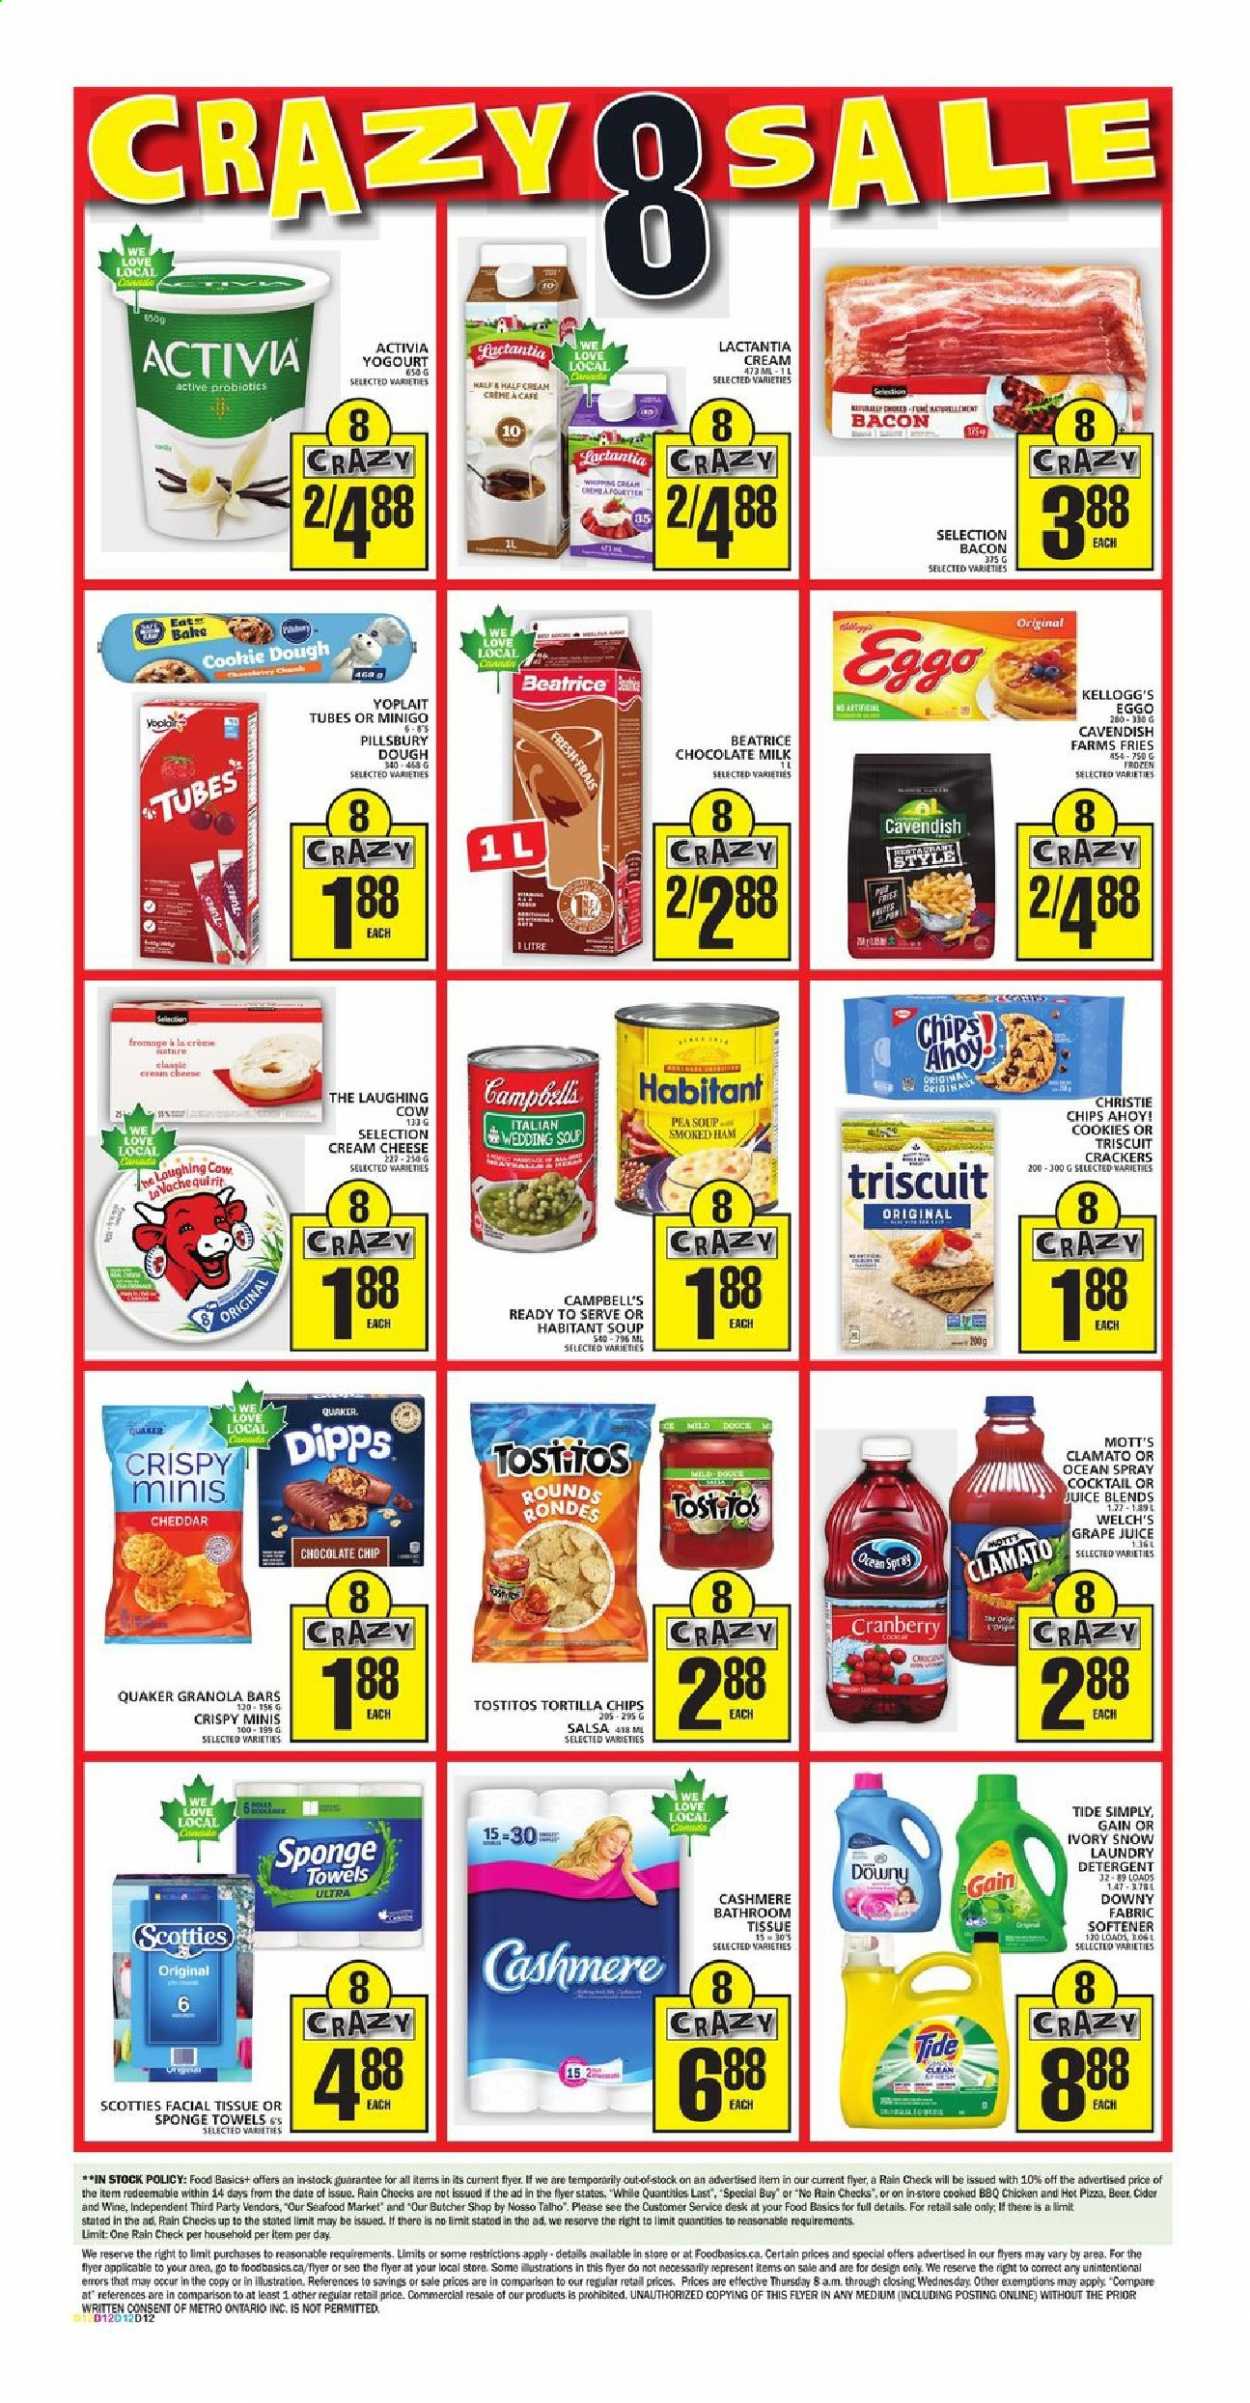 thumbnail - Food Basics Flyer - June 24, 2021 - June 30, 2021 - Sales products - Welch's, Mott's, seafood, Campbell's, pizza, soup, Pillsbury, Quaker, bacon, ham, smoked ham, cream cheese, The Laughing Cow, Activia, Yoplait, milk, potato fries, cookie dough, cookies, milk chocolate, crackers, Kellogg's, Chips Ahoy!, tortilla chips, Tostitos, granola bar, salsa, juice, Clamato, wine, cider, beer, bath tissue, Gain, Tide, fabric softener, laundry detergent, Downy Laundry, sponge, towel, probiotics, chips. Page 6.